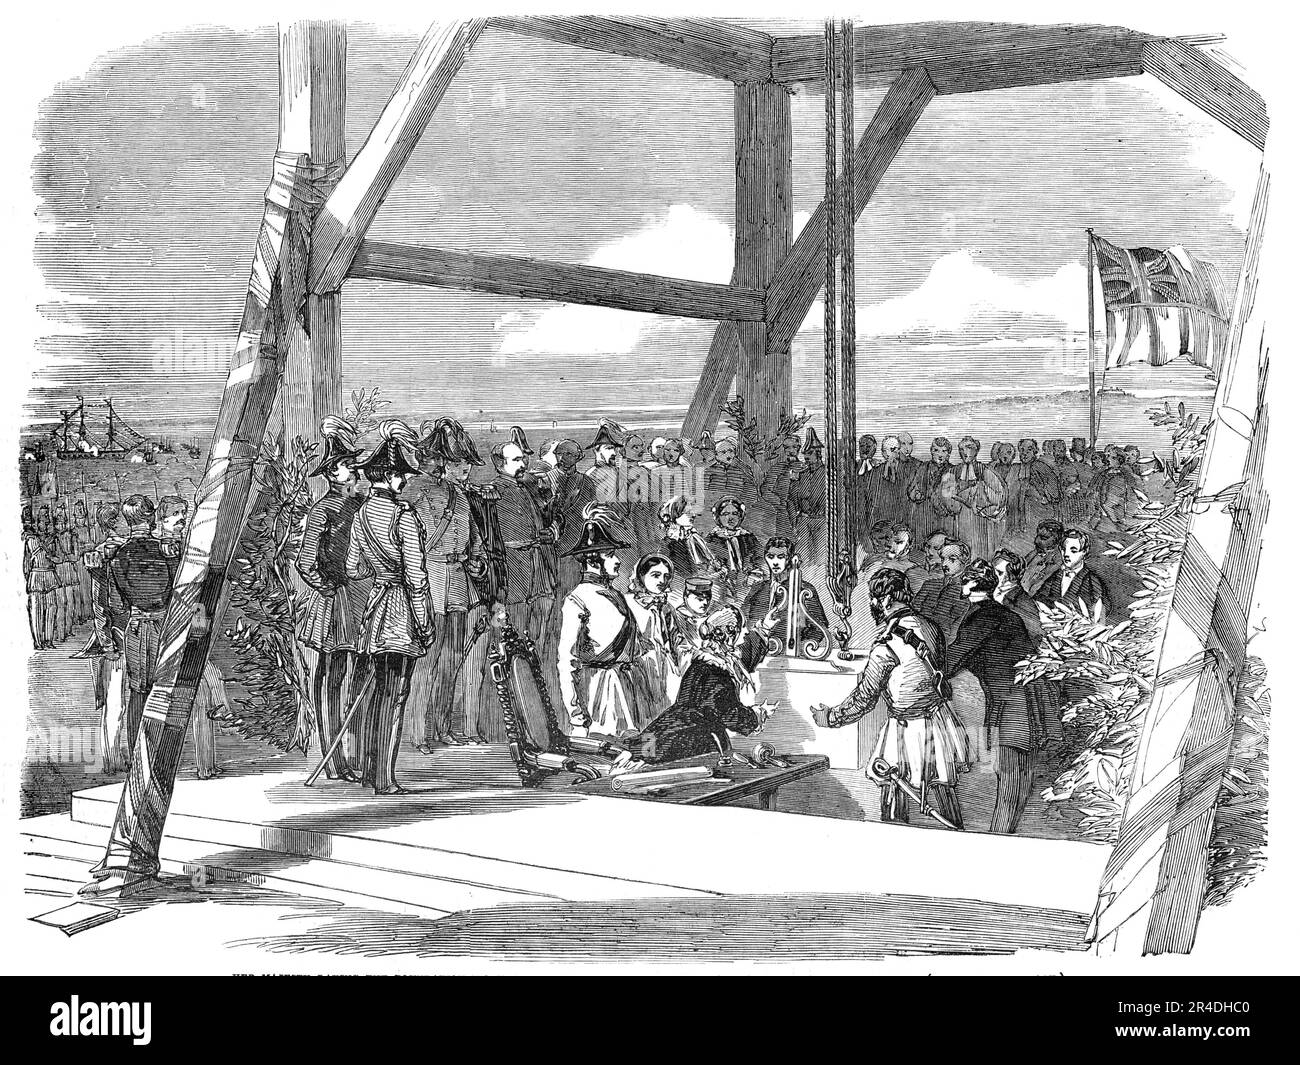 Her Majesty laying the Foundation-Stone of the New Military Hospital at Hamble, near Southampton, 1856. Ceremony at the Royal Victoria Hospital: '...the commanding Engineer presented to her Majesty [Queen Victoria] the plans of the building. Her Majesty having signified her approval of them, they were placed in the copper box prepared for the purpose, together with the coins, medals, and cross, and the vellum document recording the event. The Queen tried the stone with the plummet and level, and tapped it in the usual form, taking counsel with Lord Panmure as to the correct and truly masonic m Stock Photo